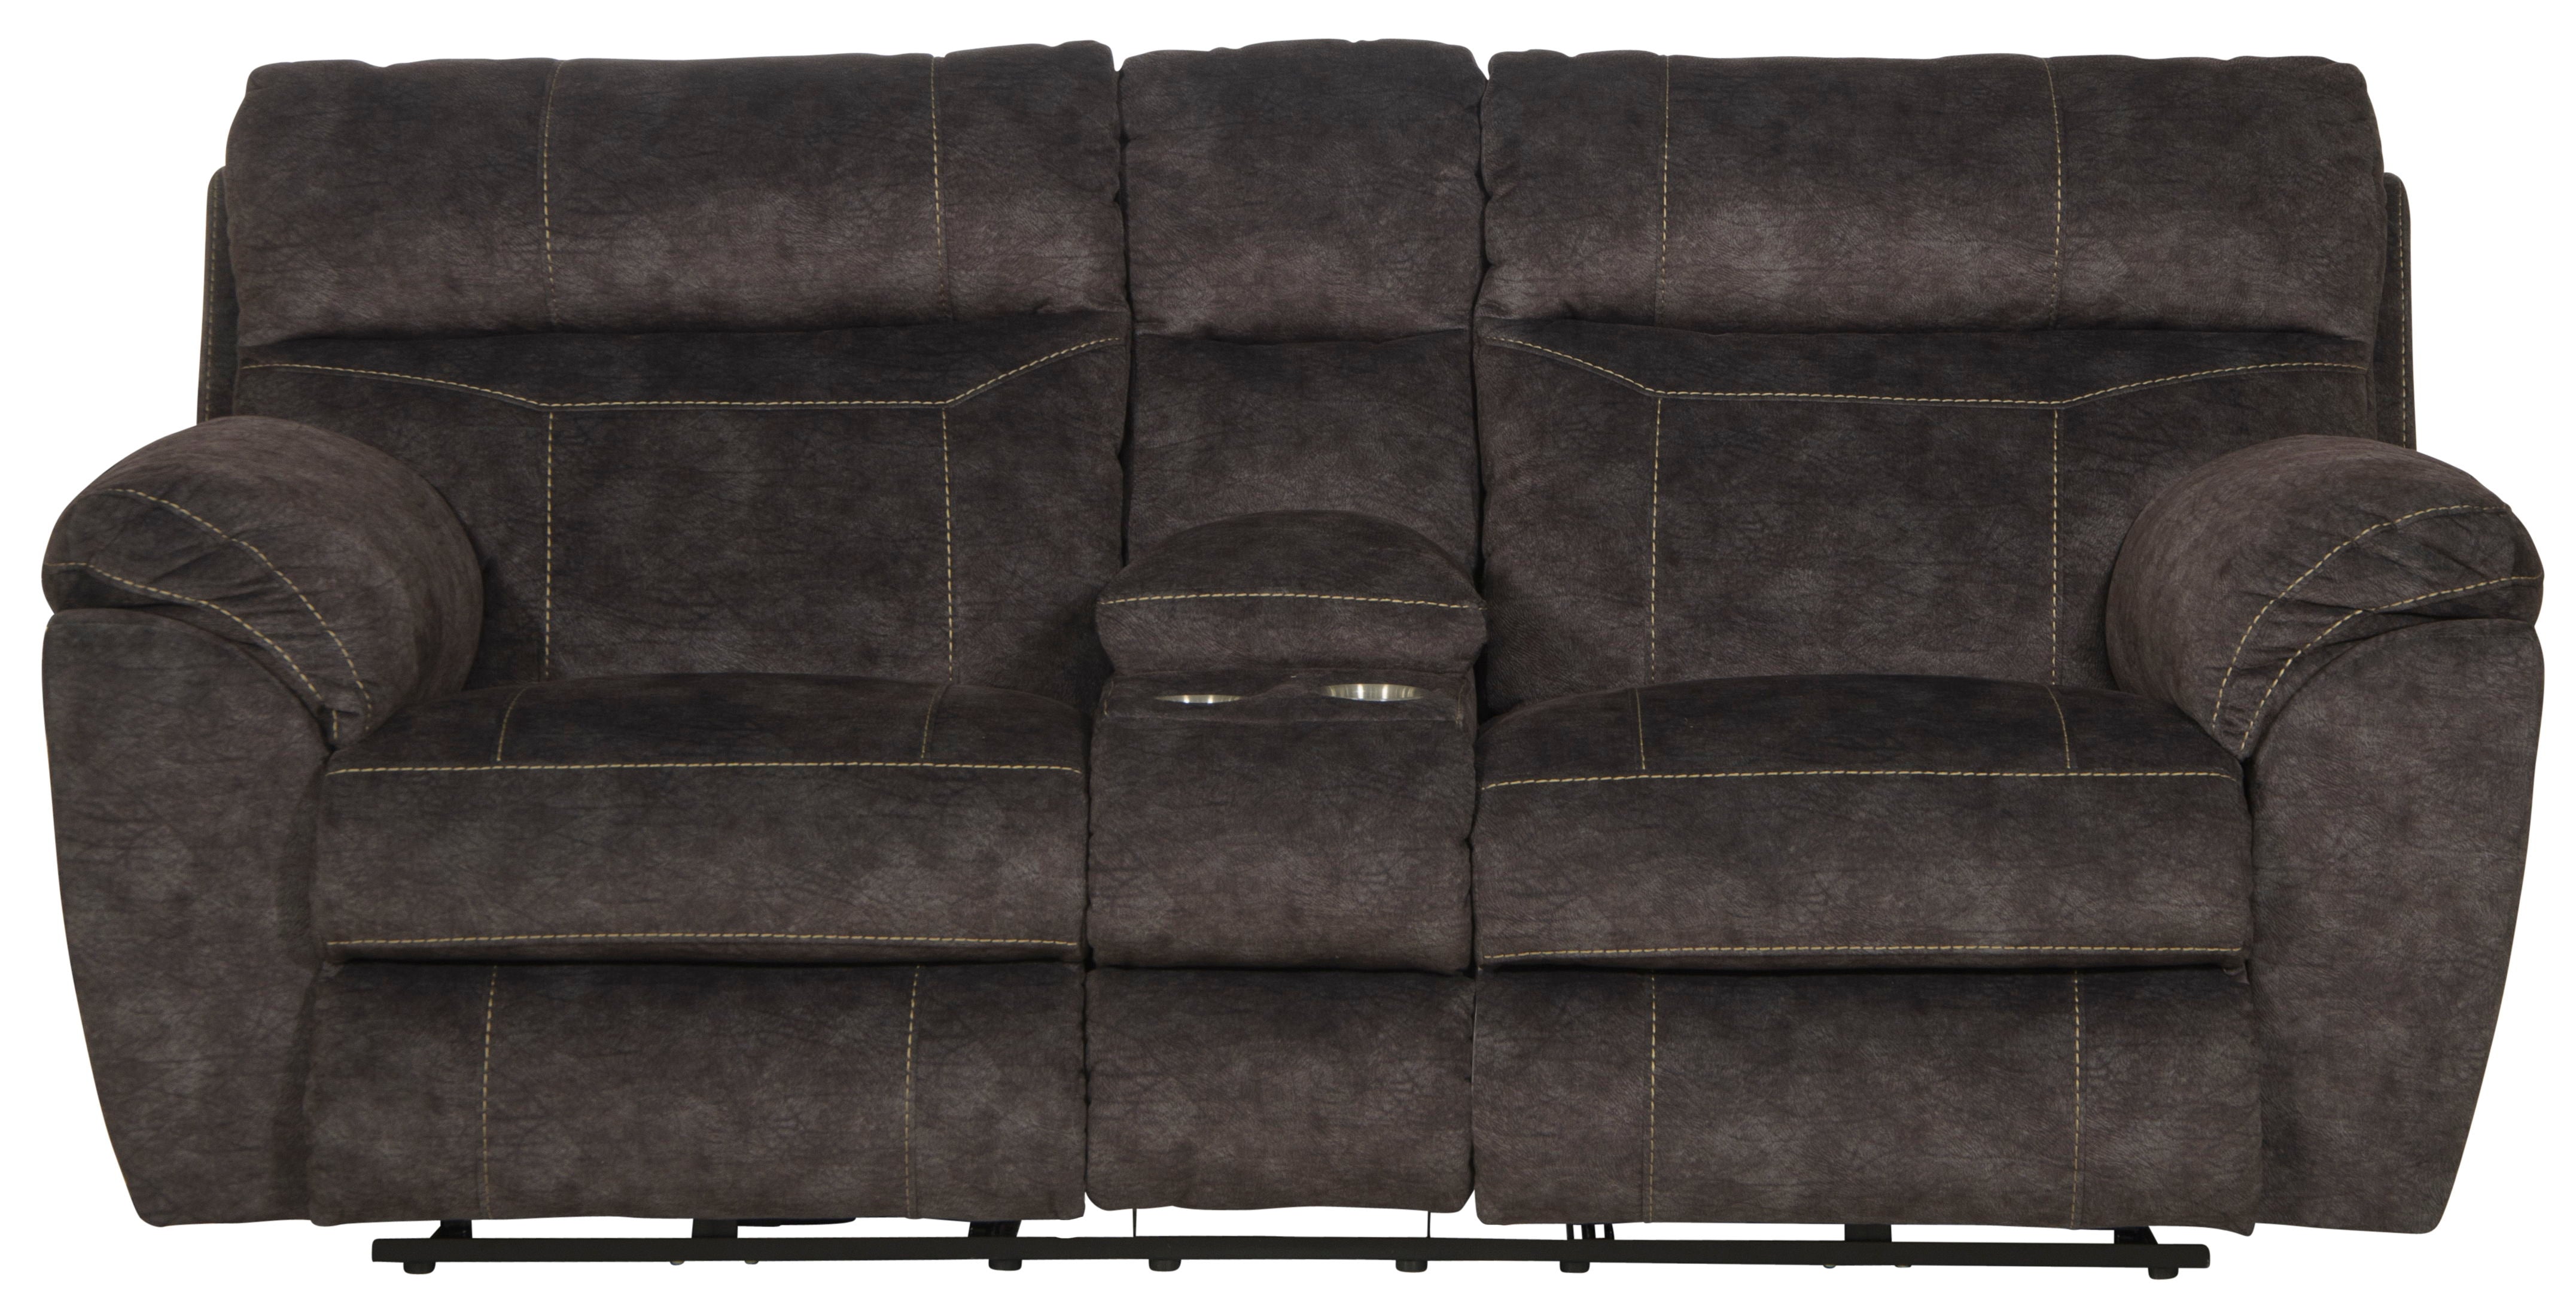 Sedona - Power Headrest Lay Flat Reclining Console Loveseat With Storage & Cupholders - 5th Avenue Furniture